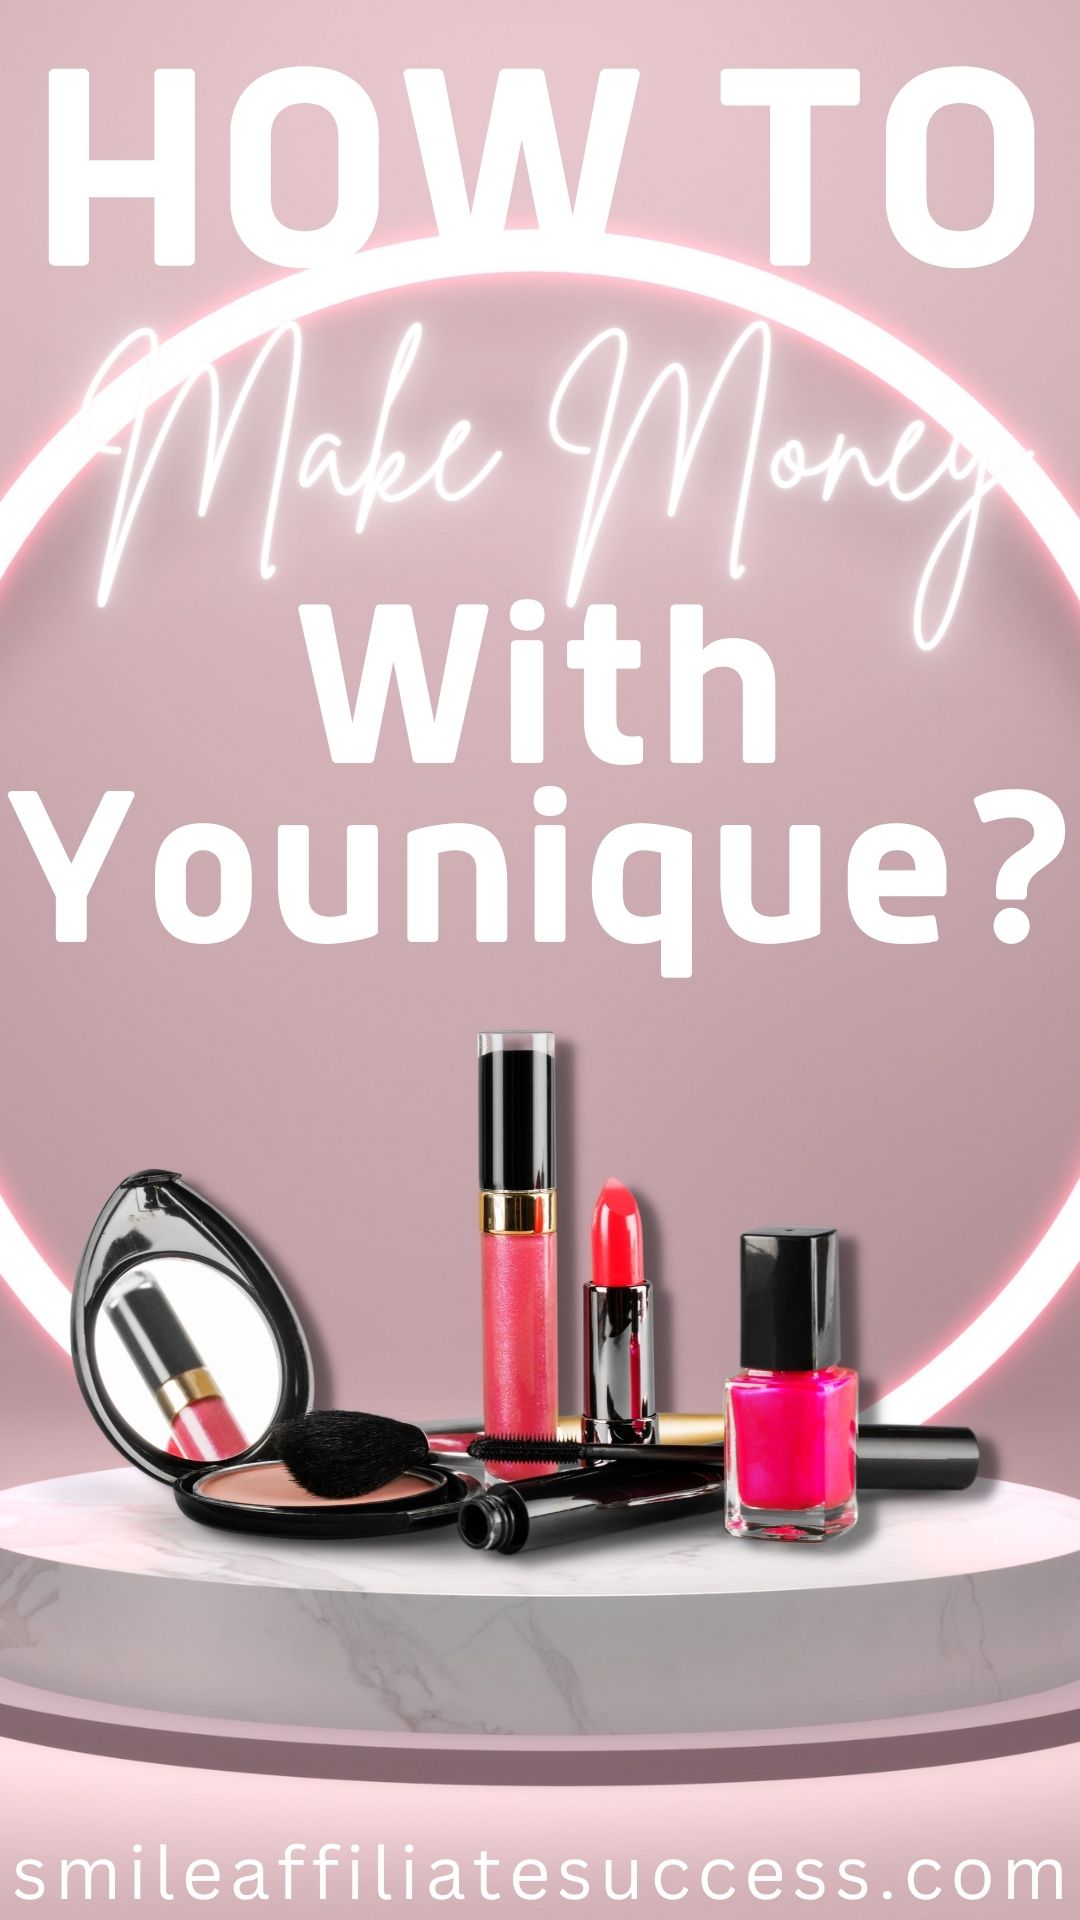 Can You Make Money By Younique?